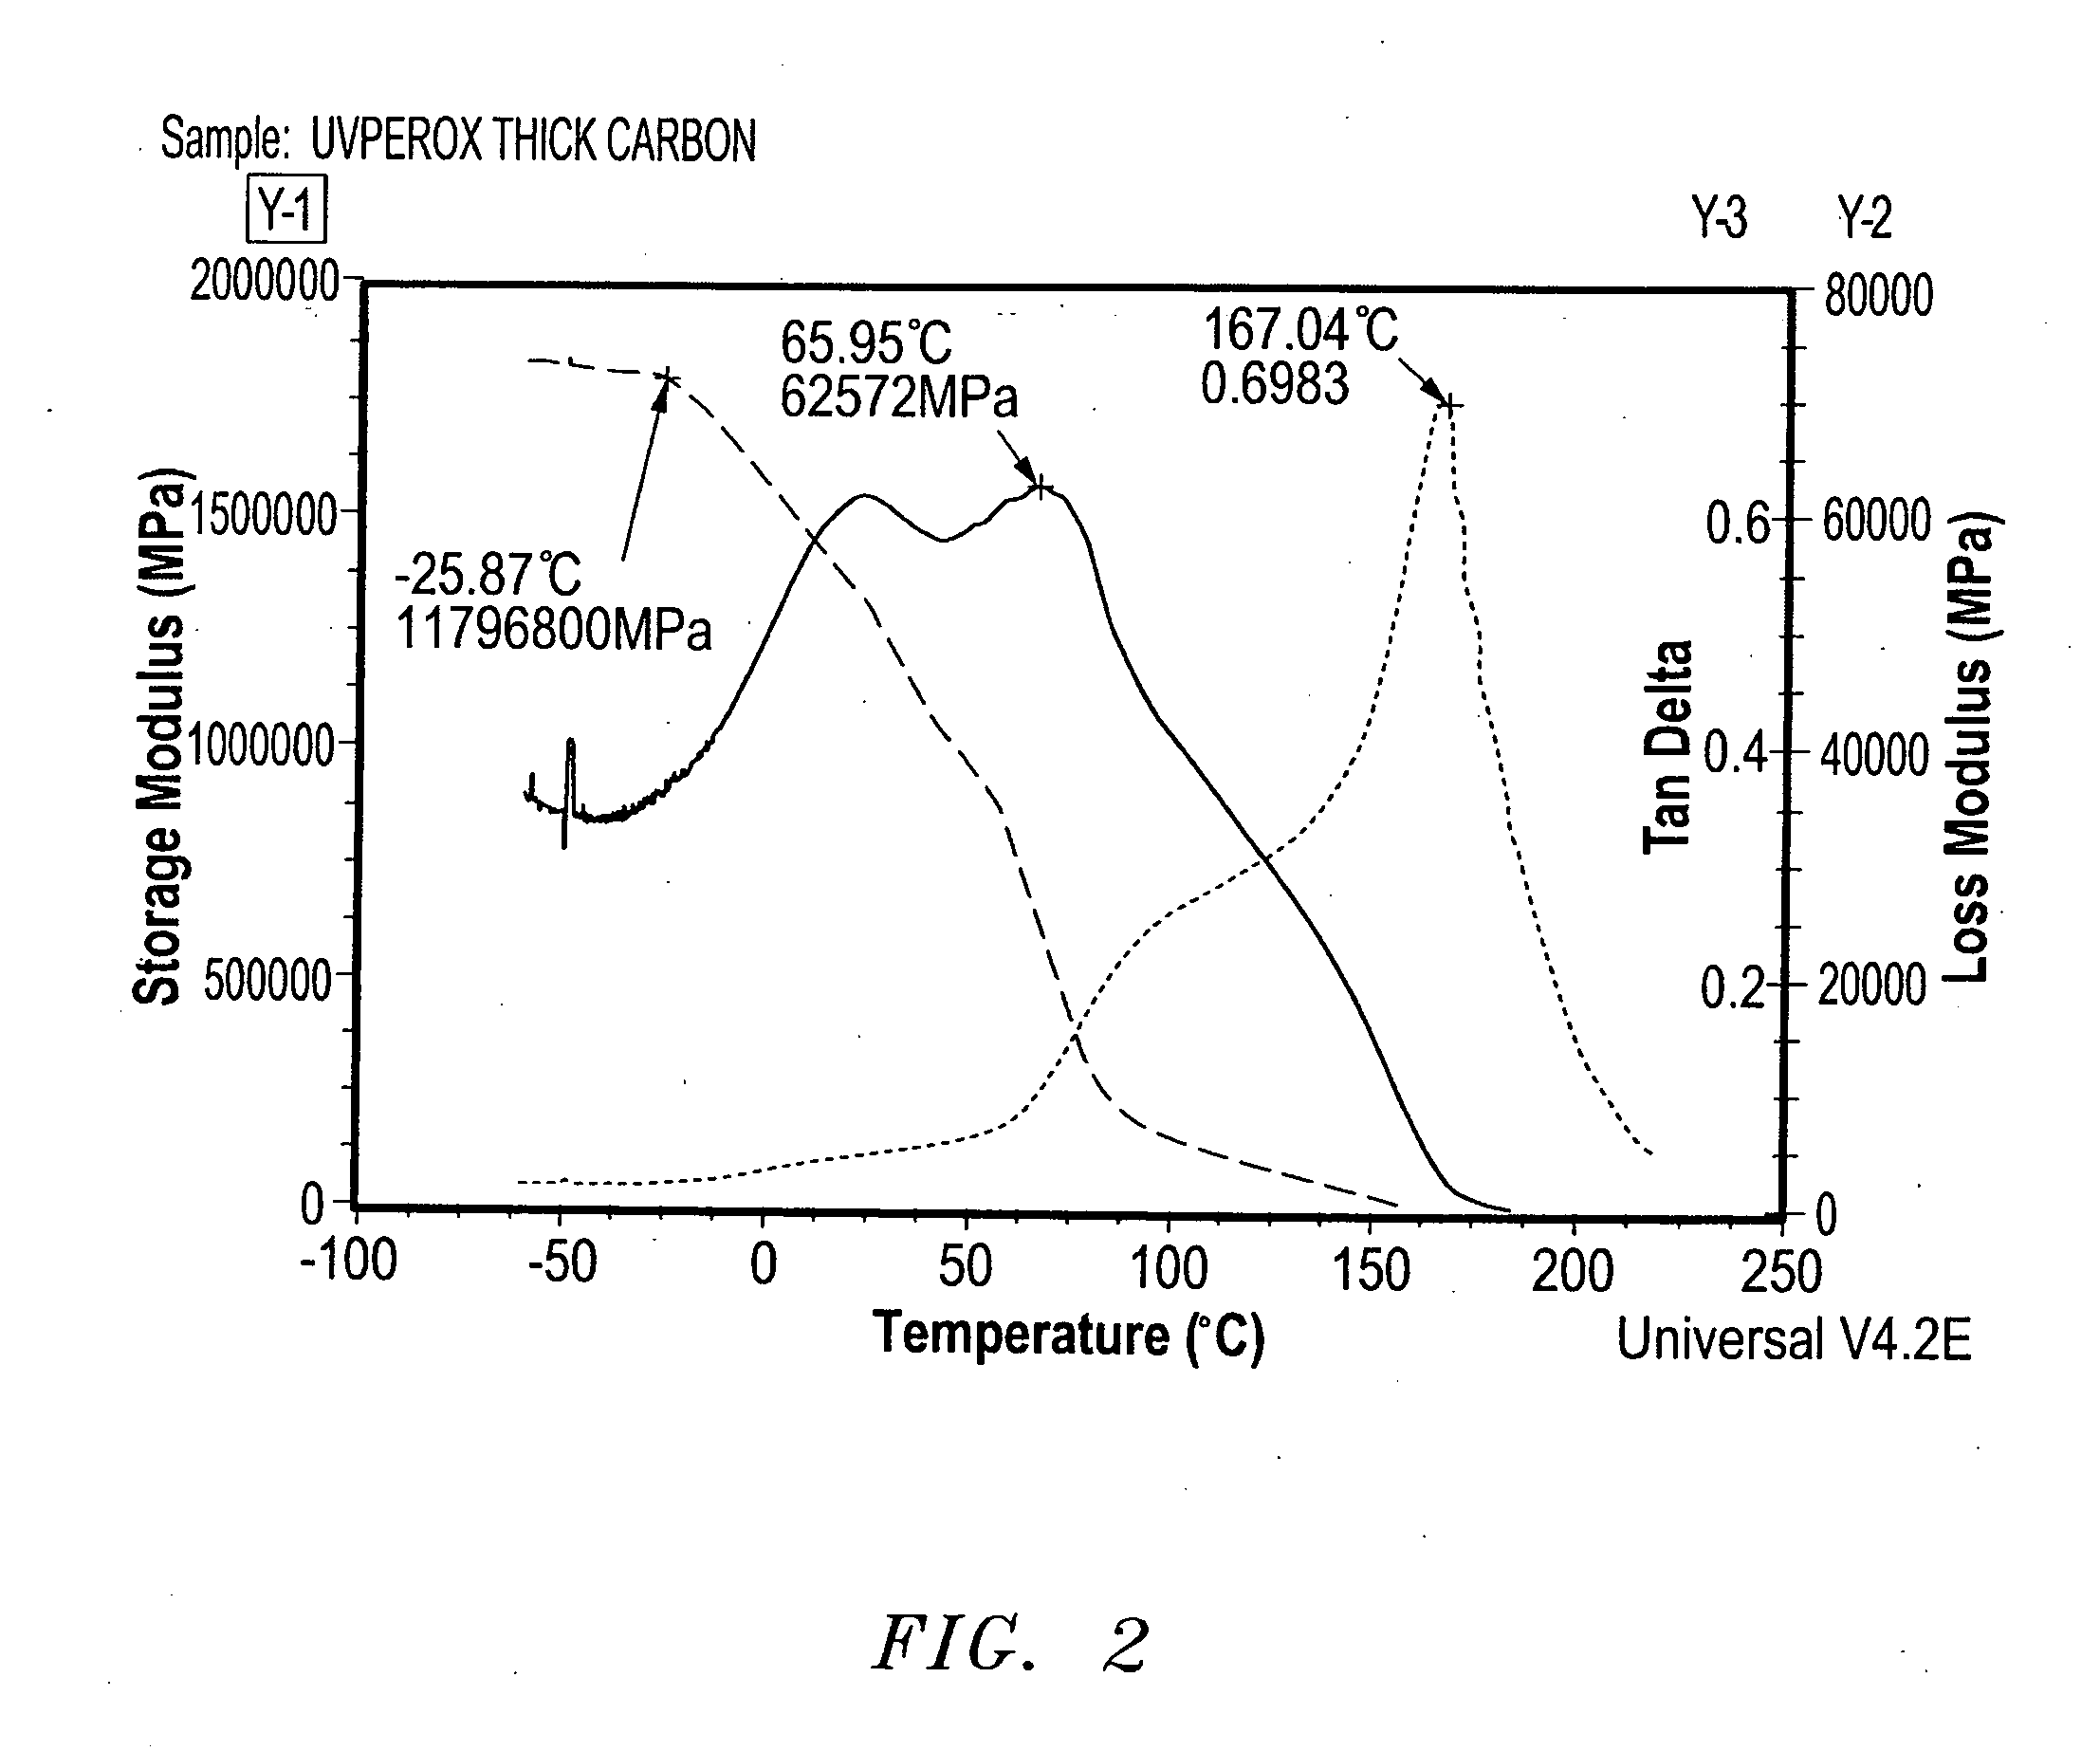 Ultraviolet light curing compositions for composite repair